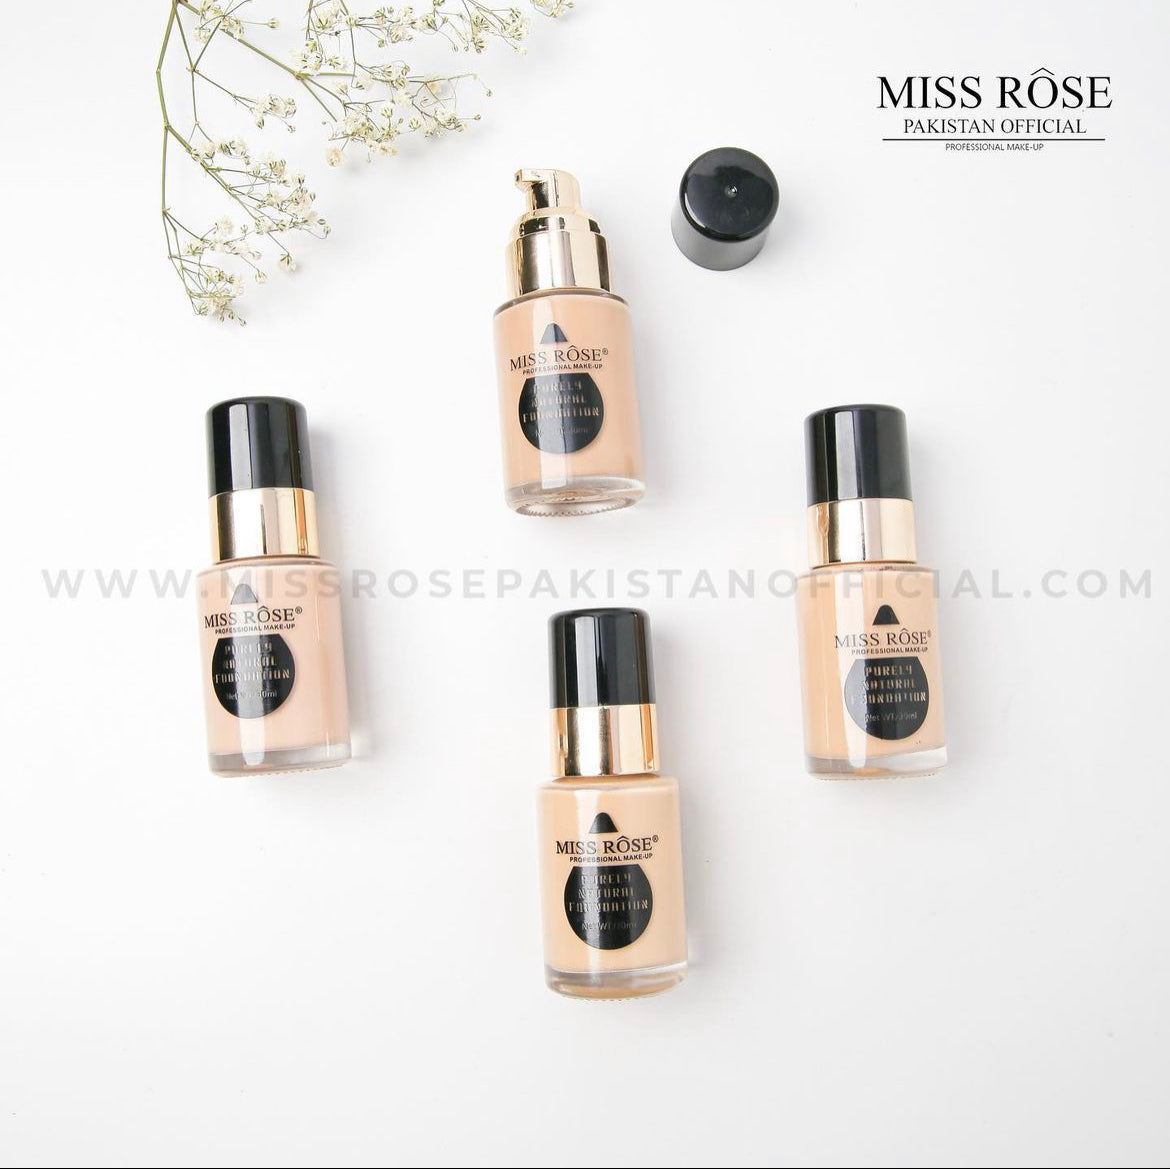 Miss Rose Purely Natural Foundation – MISSROSE PAKISTAN OFFICIAL